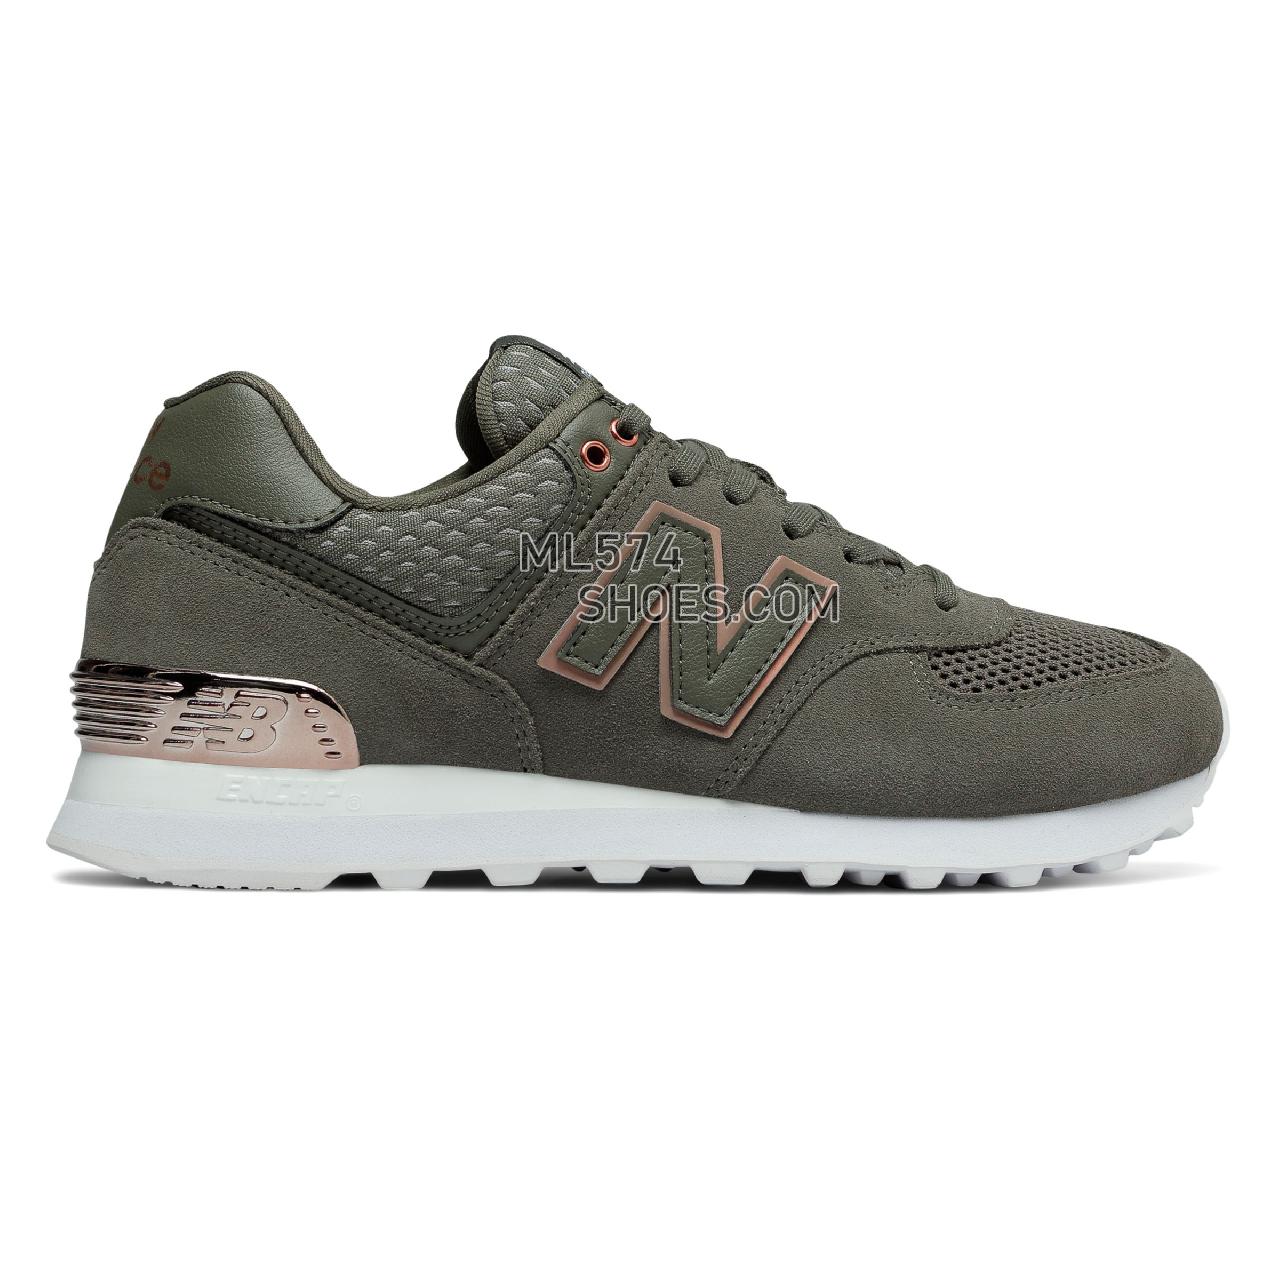 New Balance 574 All Day Rose - Women's 574 - Classic Olive - WL574FSD